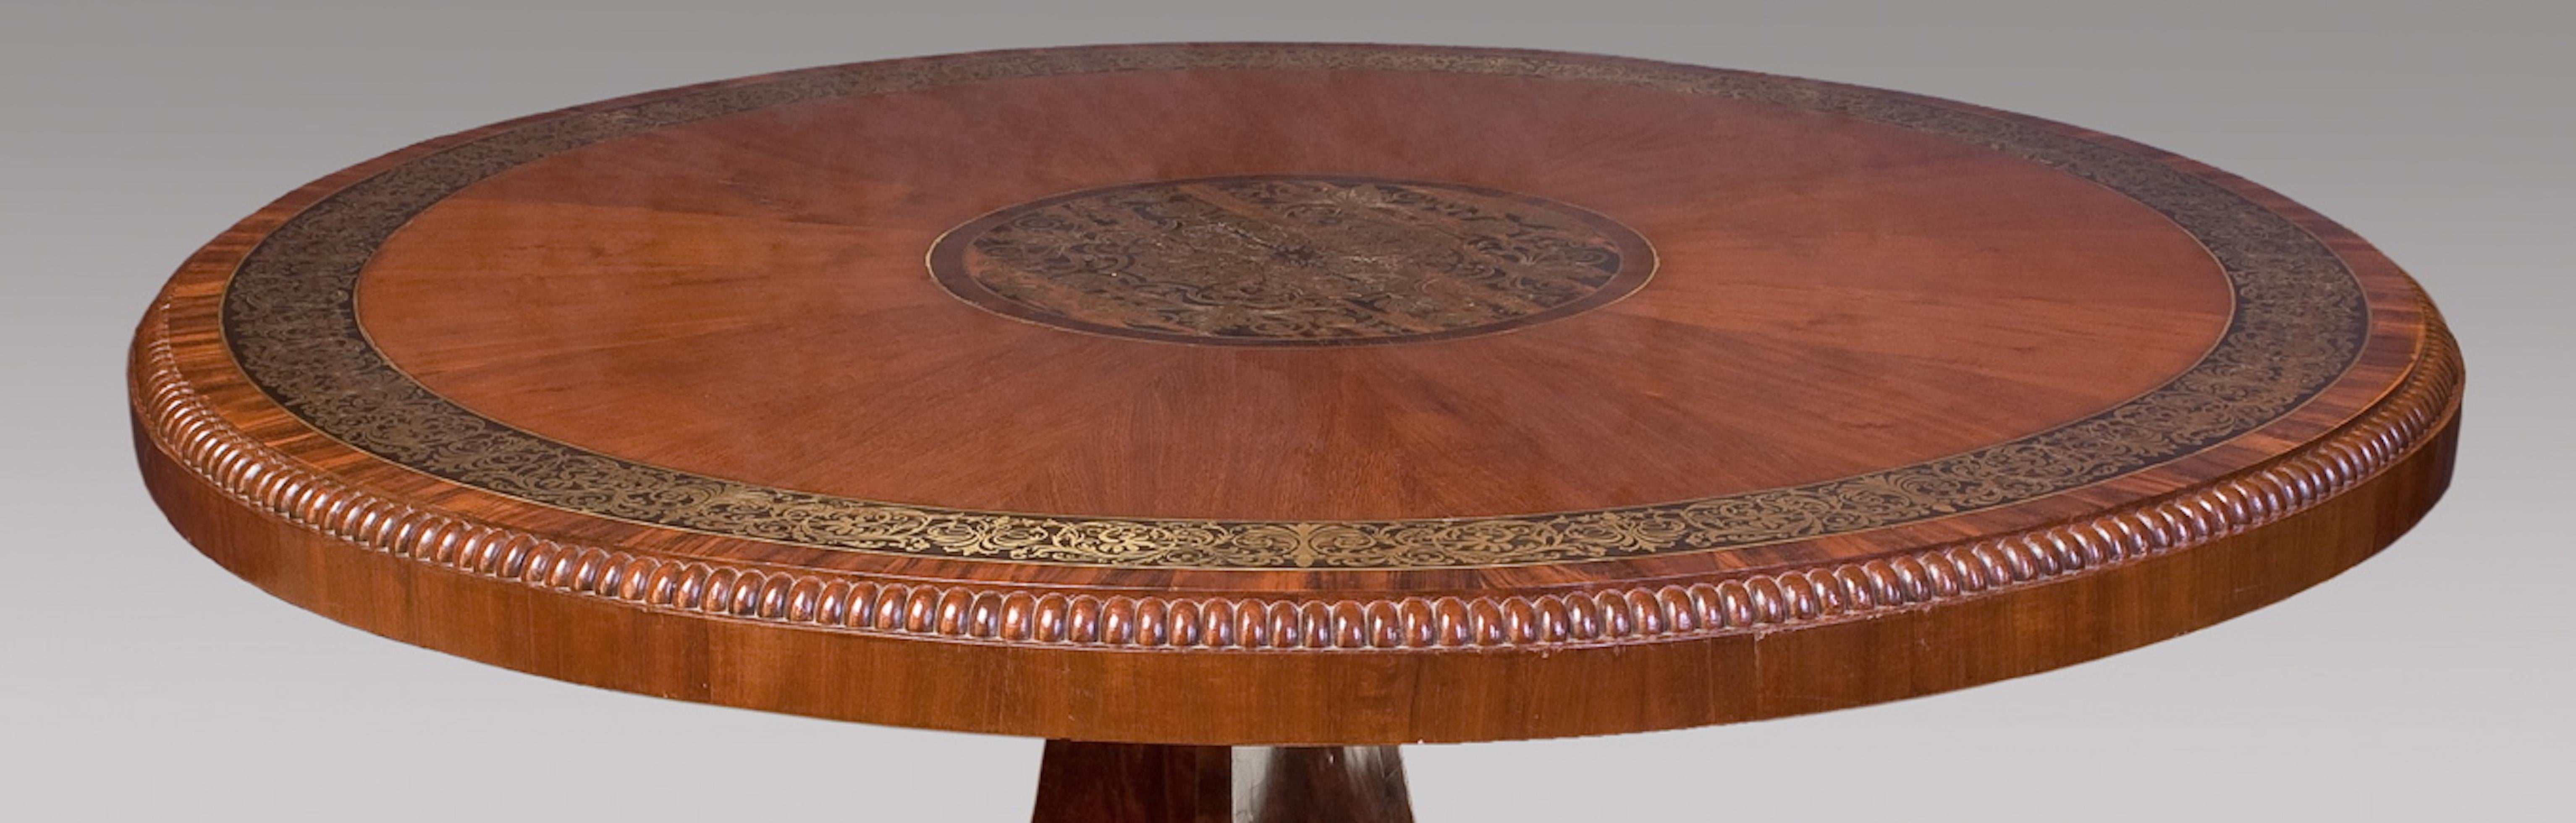 Fine Early 19th Century Regency Period  Center Table In Excellent Condition For Sale In Saint-Ouen, FR